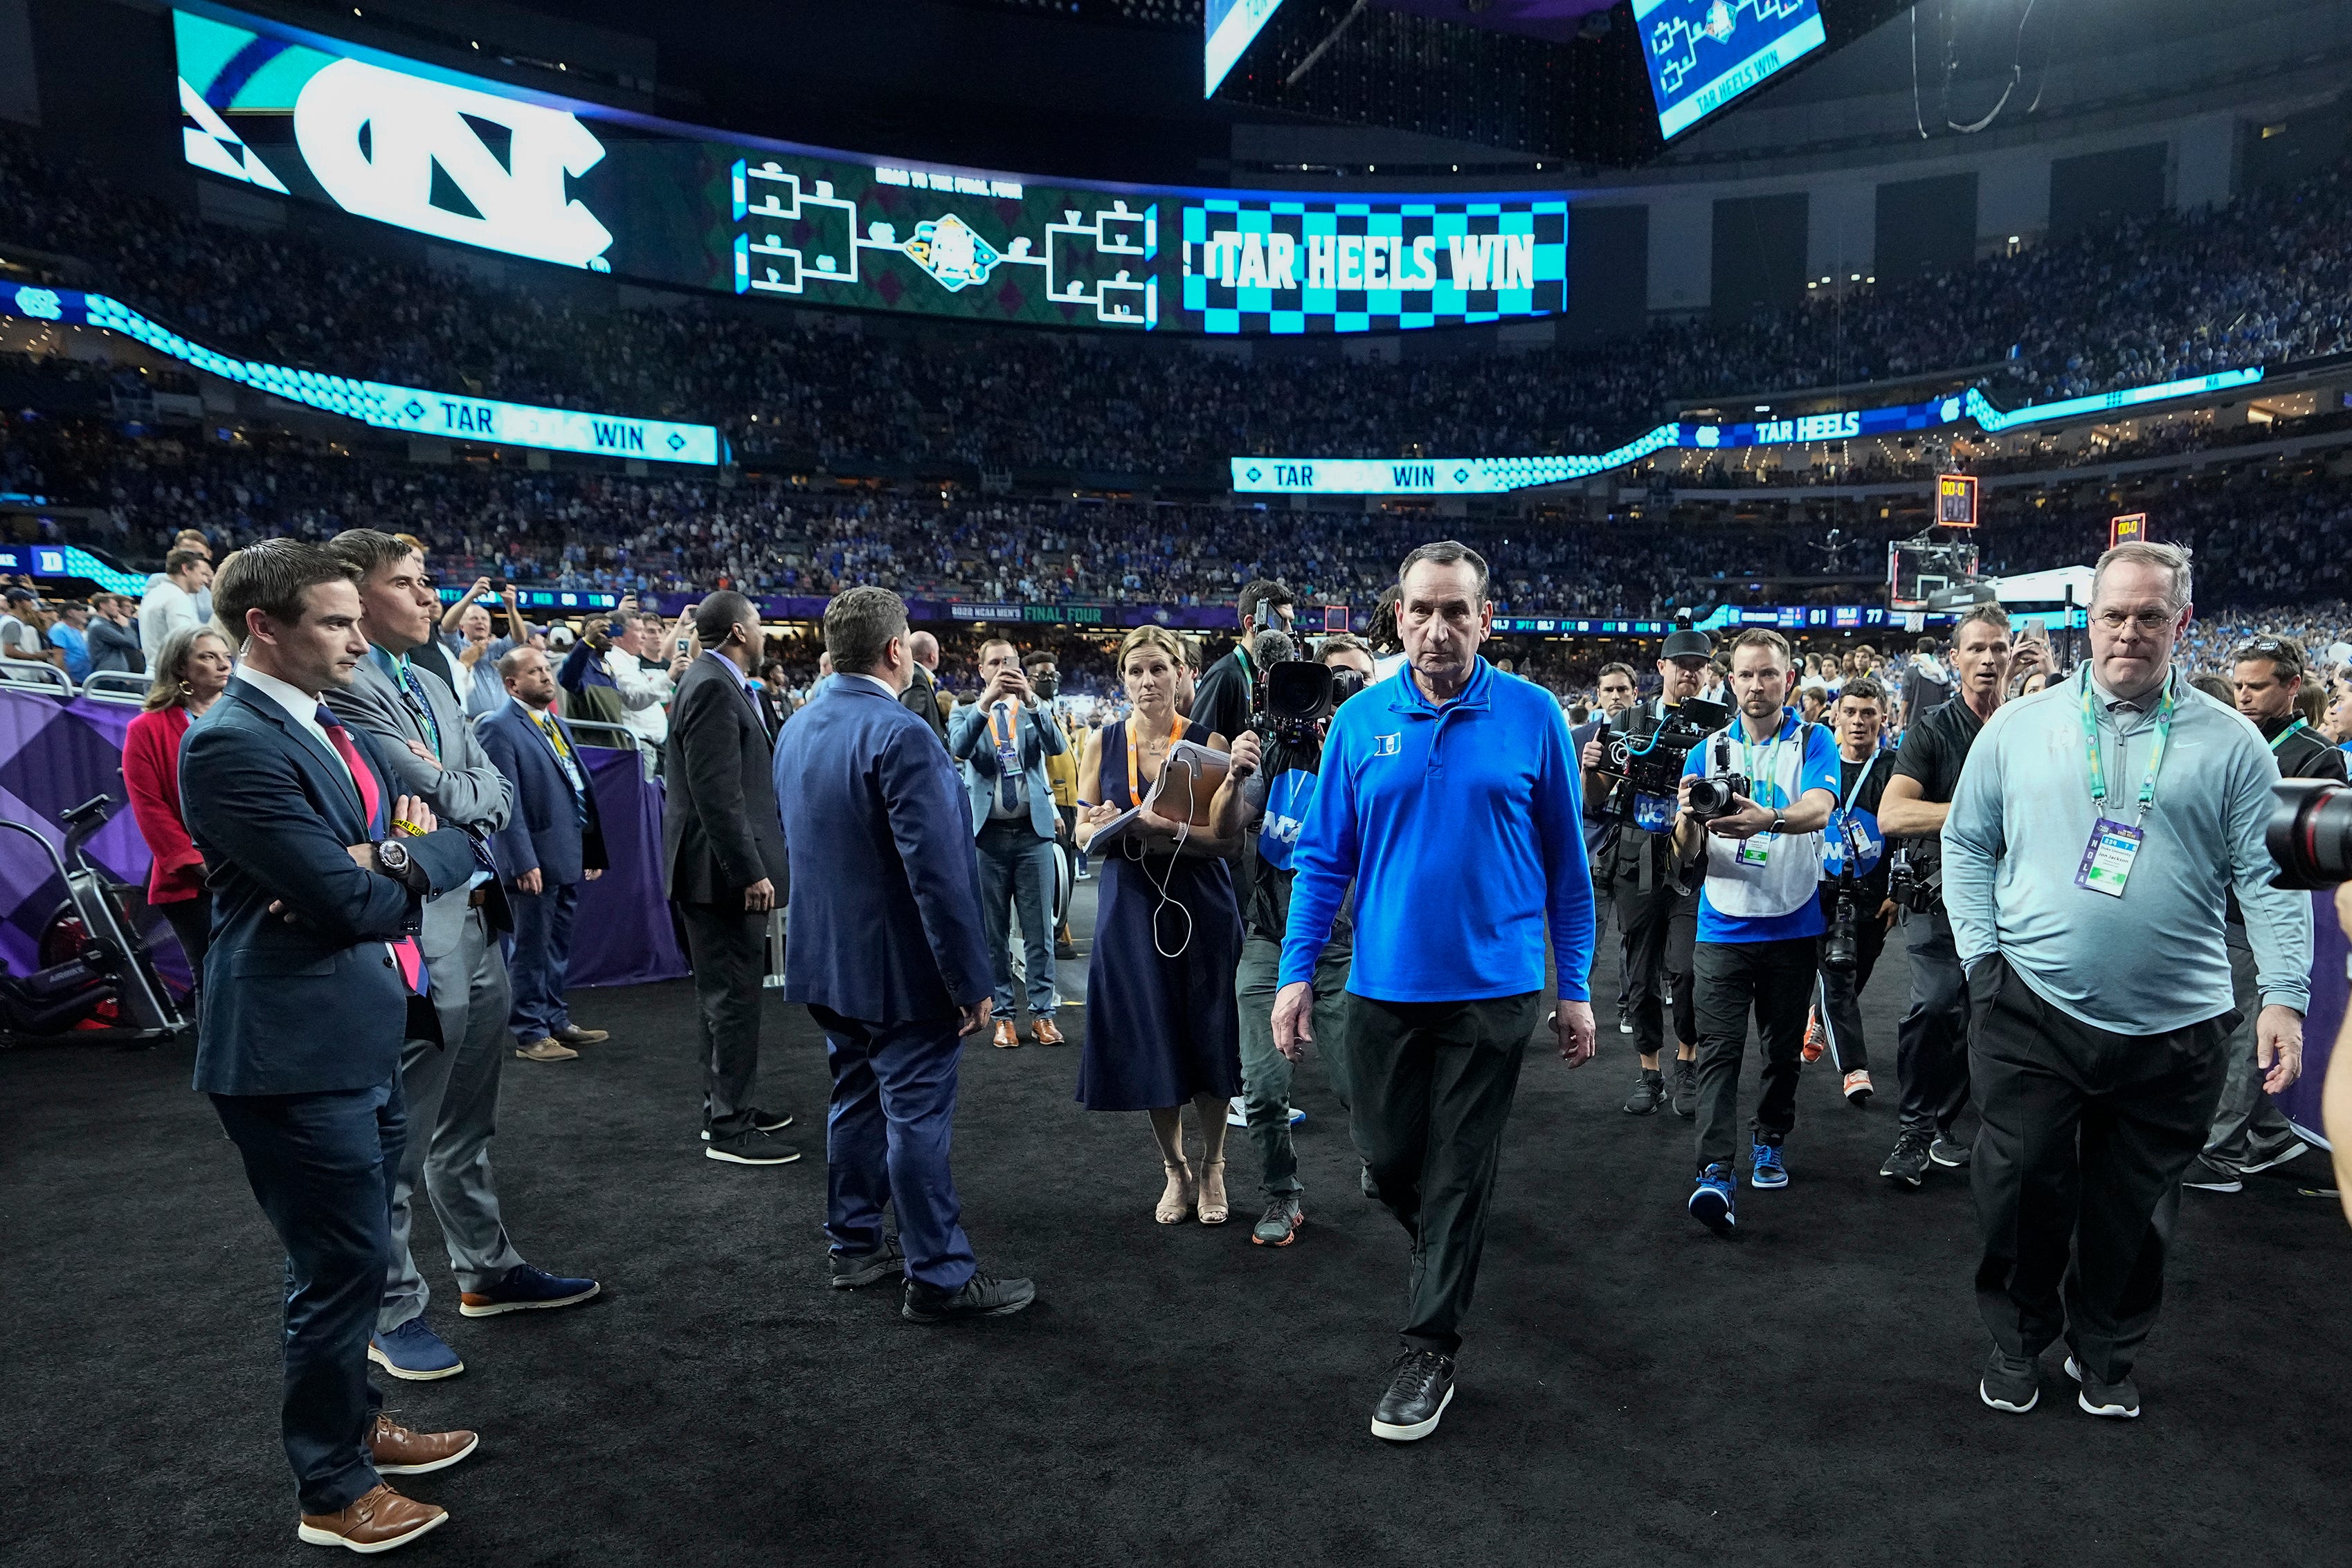 Former Duke coach Mike Krzyzewski credited with $13.7M in compensation for 2020 calendar year thumbnail